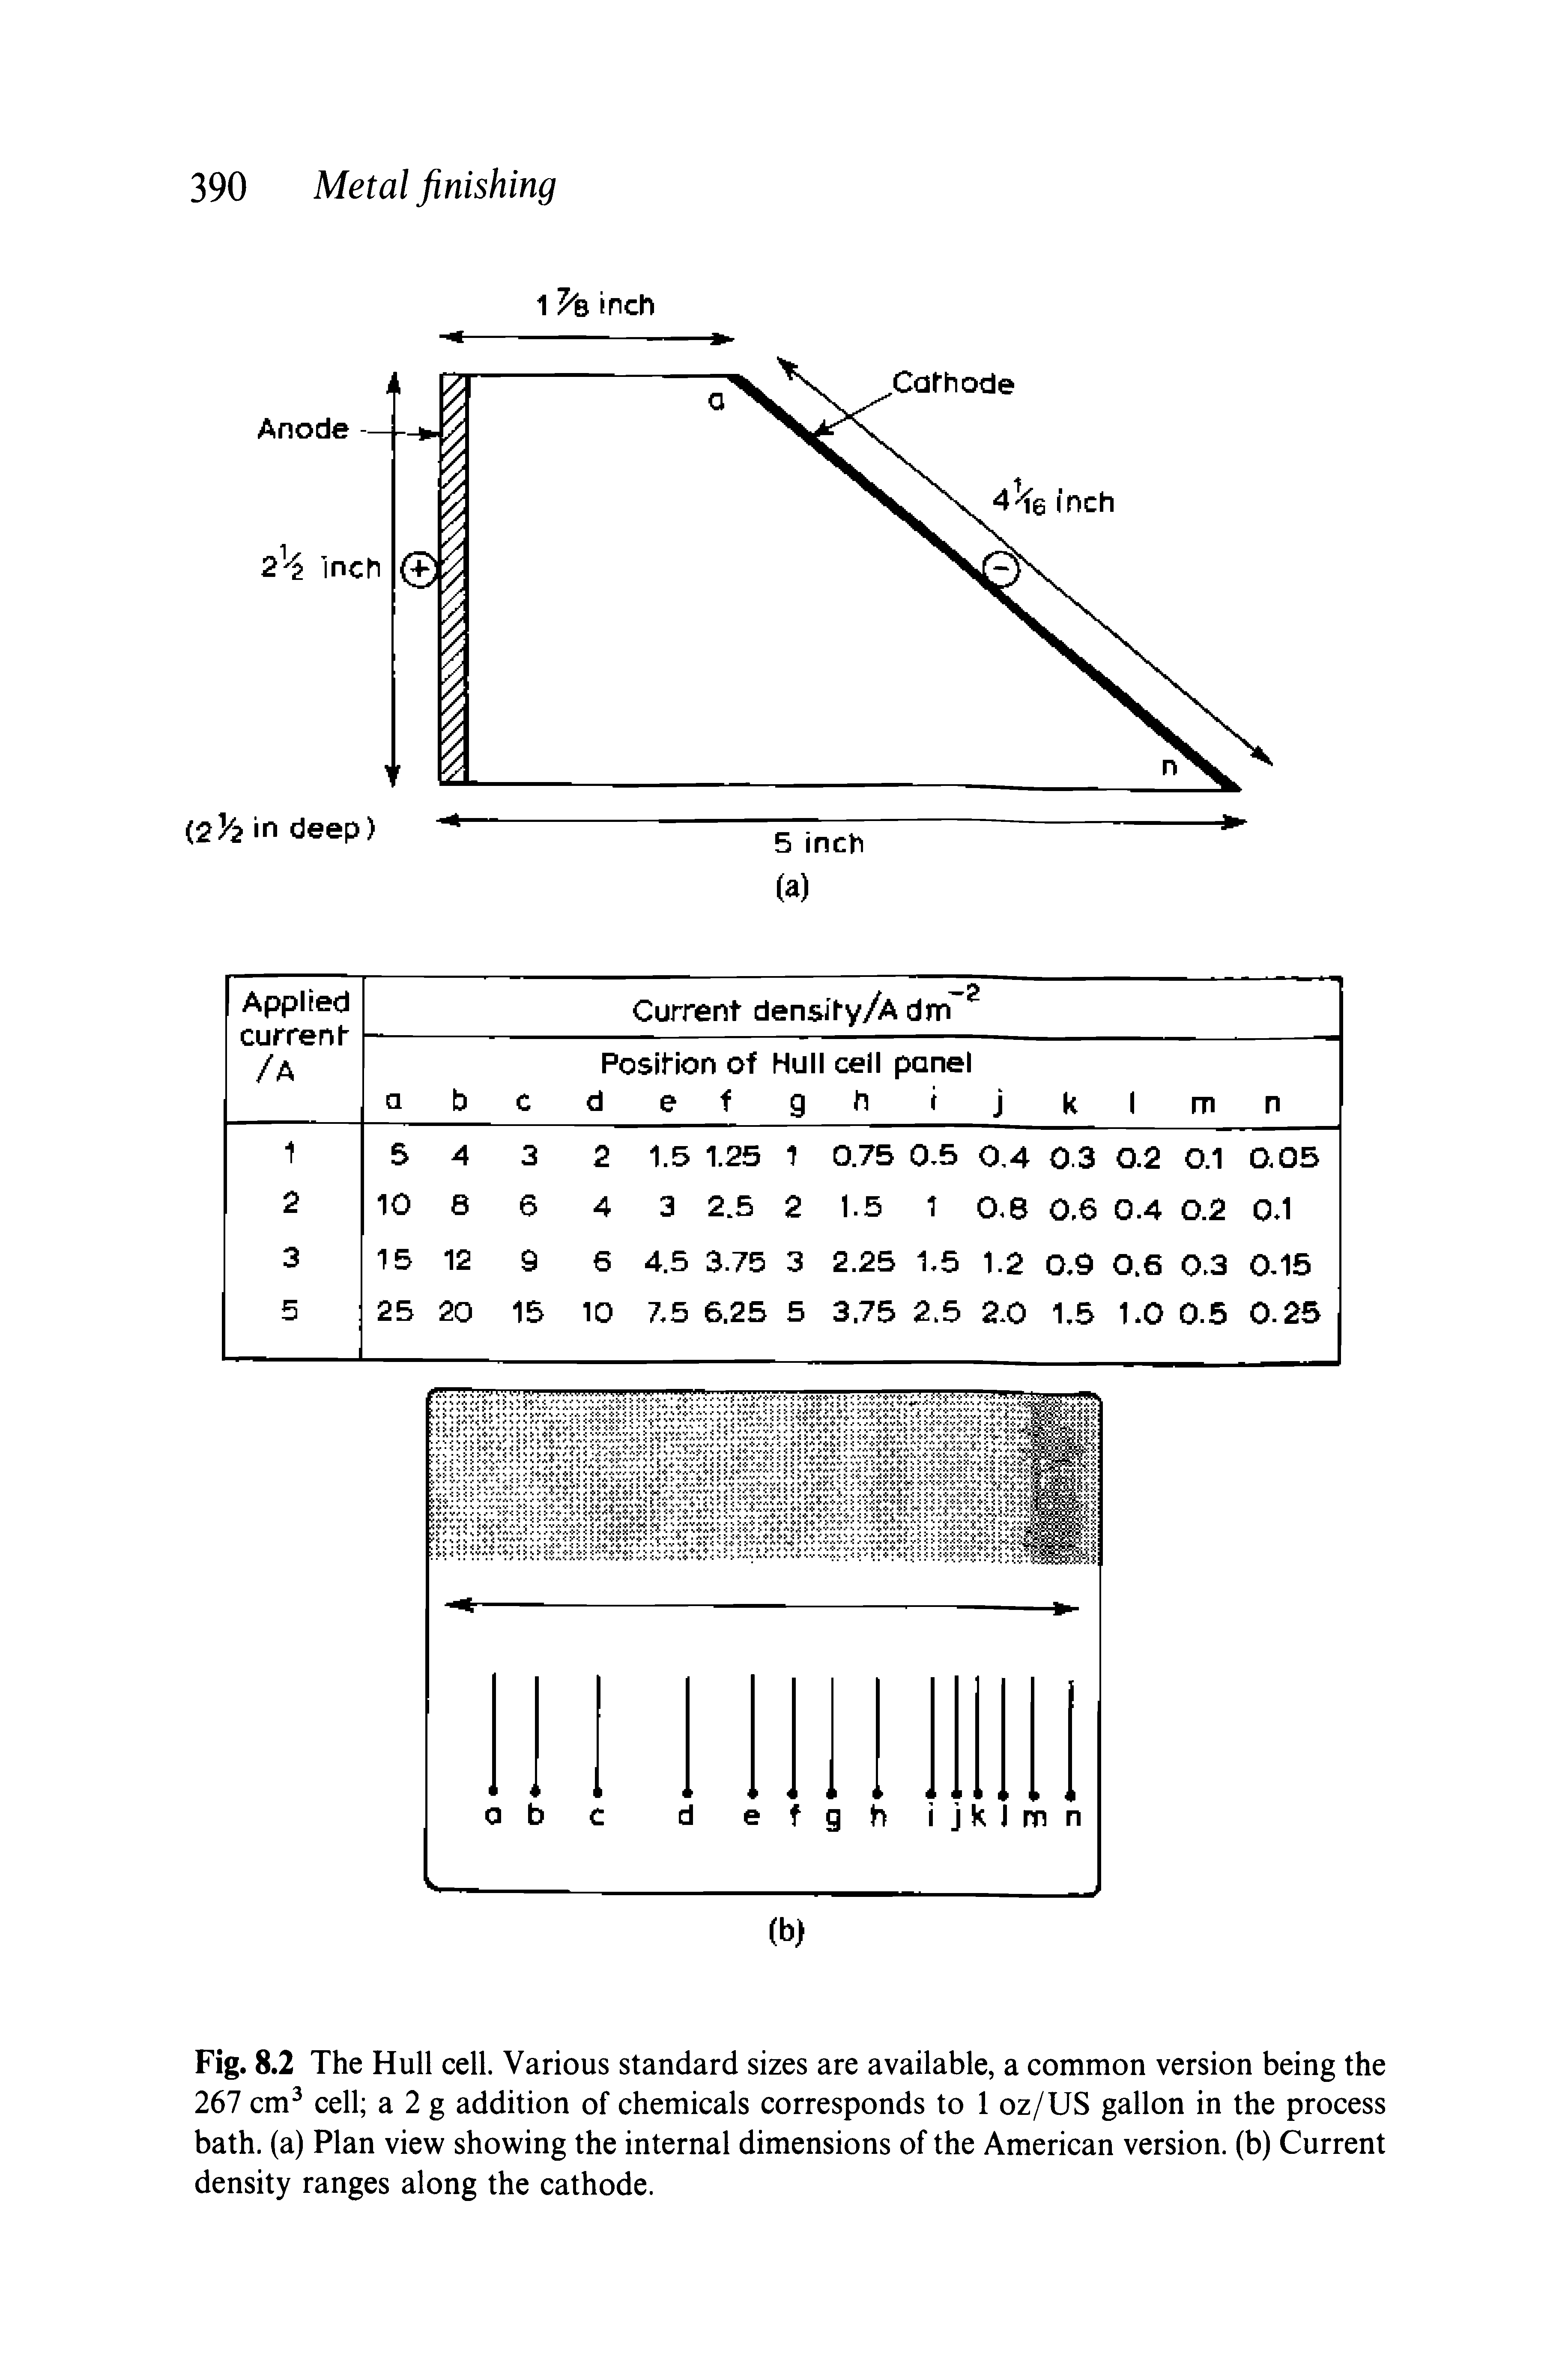 Fig. 8.2 The Hull cell. Various standard sizes are available, a common version being the 267 cm cell a 2 g addition of chemicals corresponds to 1 oz/US gallon in the process bath, (a) Plan view showing the internal dimensions of the American version, (b) Current density ranges along the cathode.